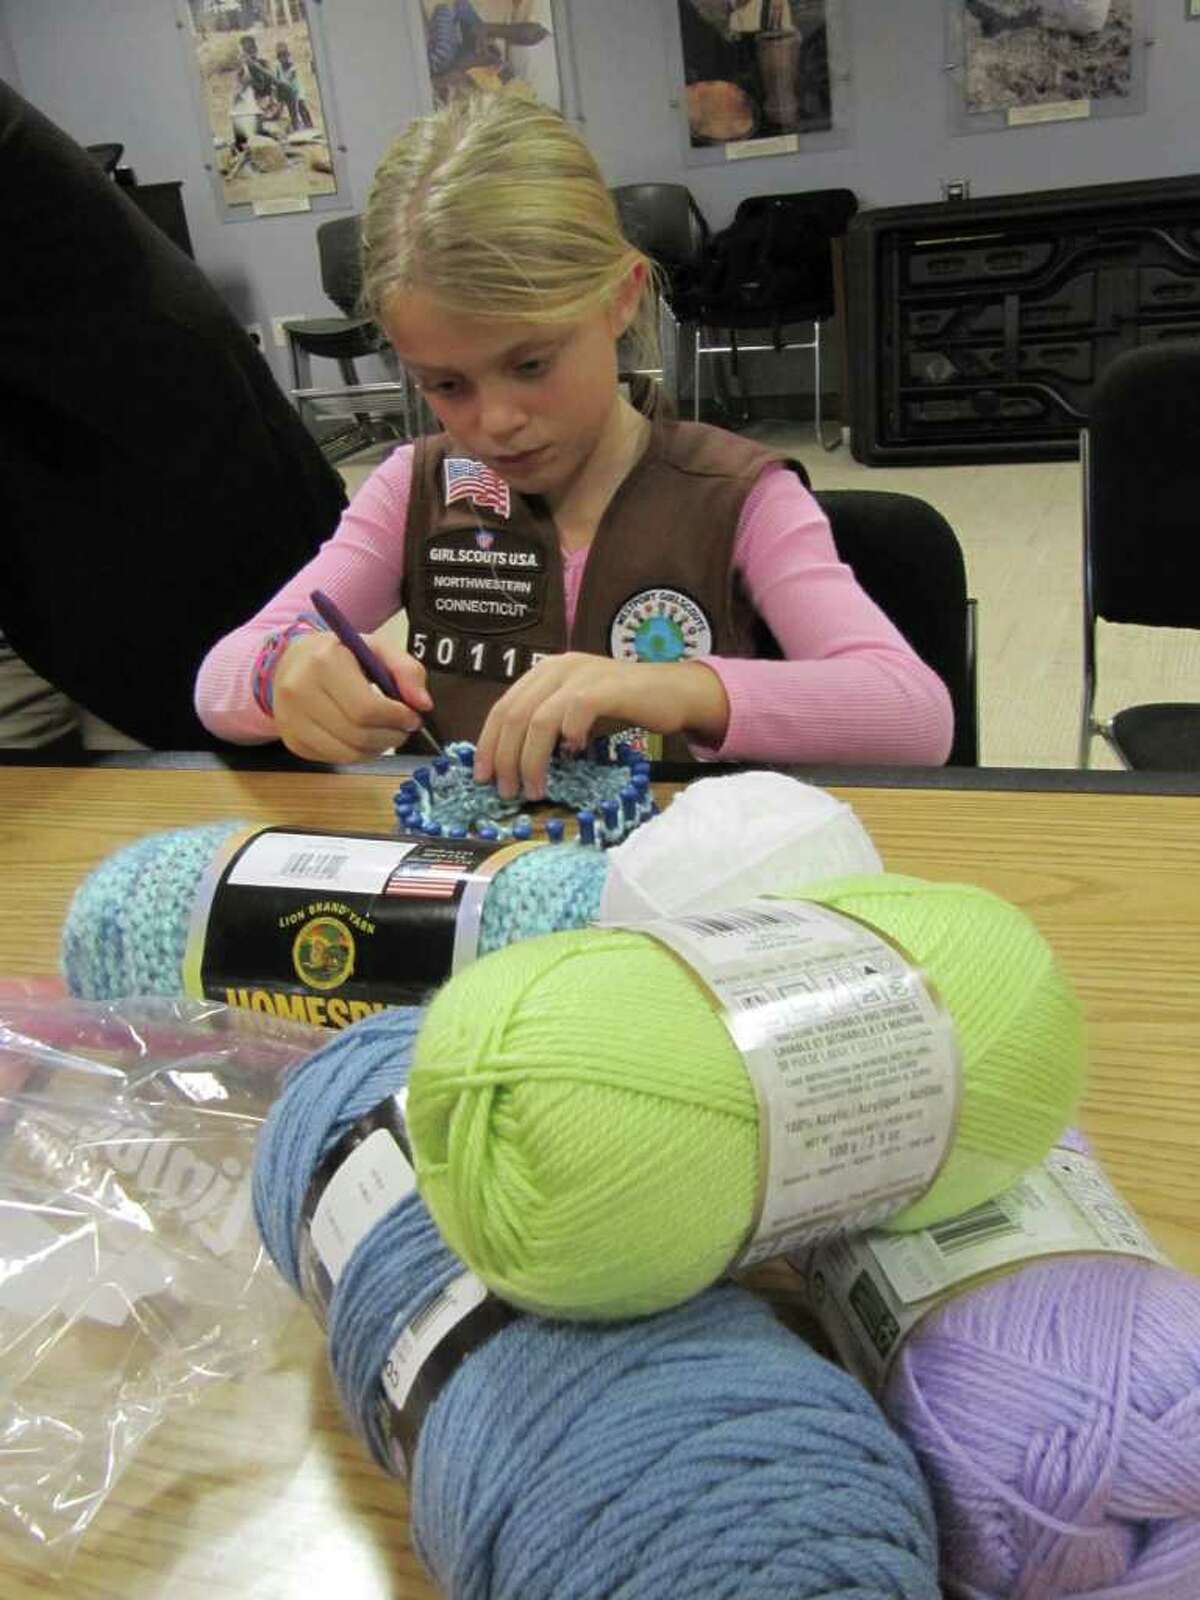 Hannah Paprotna, a member of Brownie Troop 50115, makes a cap for an infant child in a developing country. The effort is part of Save the Children's "Caps For Good" campaign.